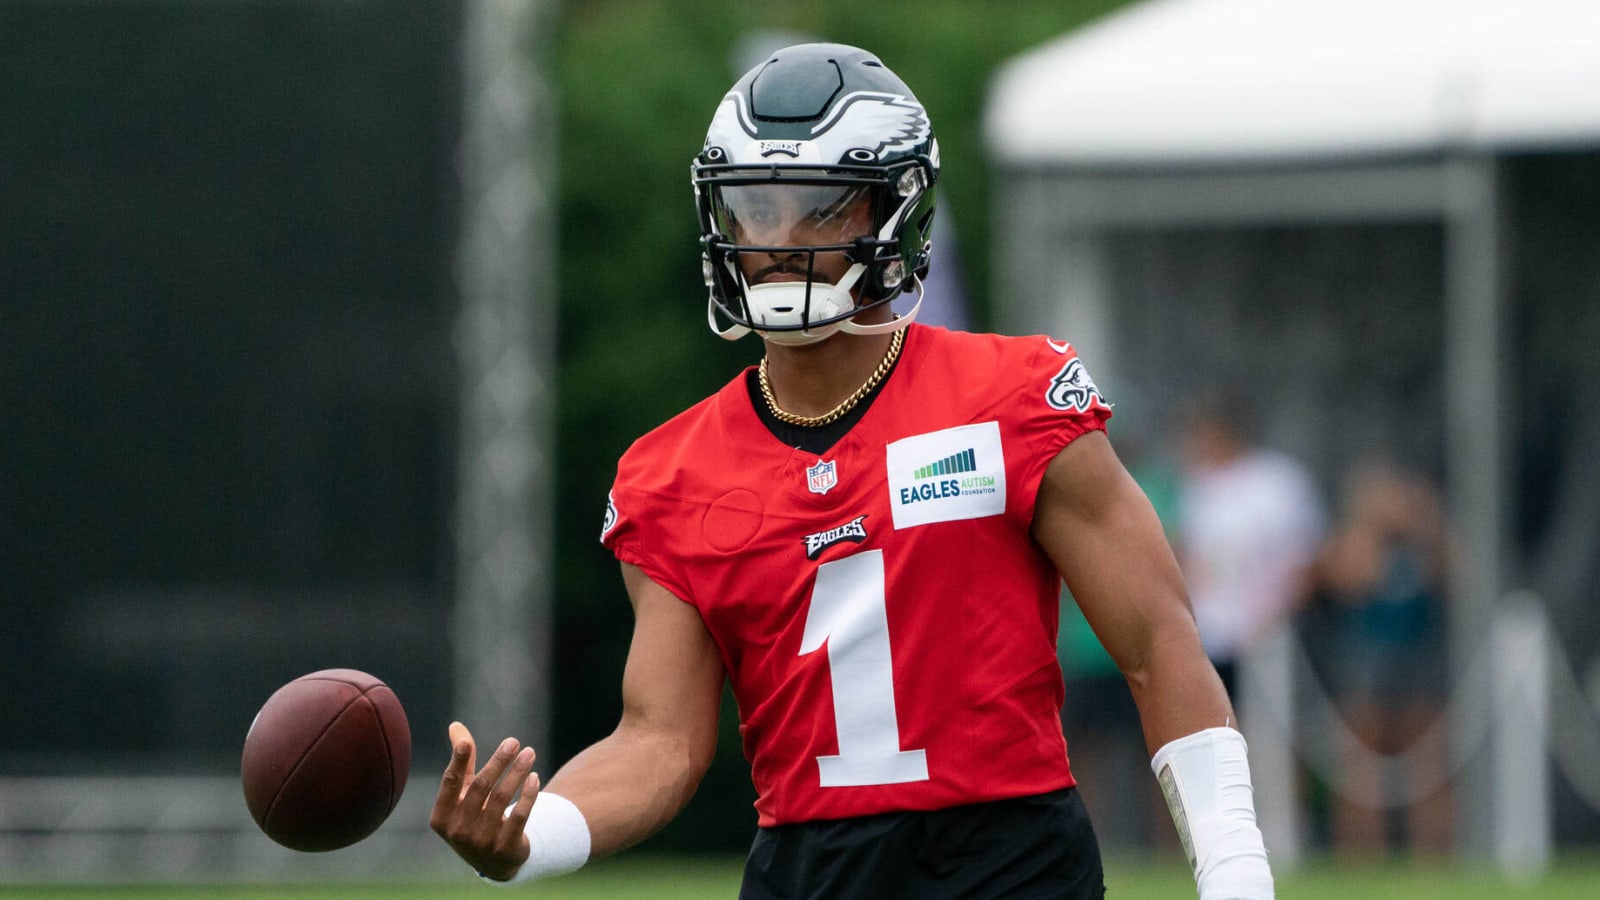 Robert Griffin III: Eagles QB Jalen Hurts will show 'extreme growth' as a passer this season